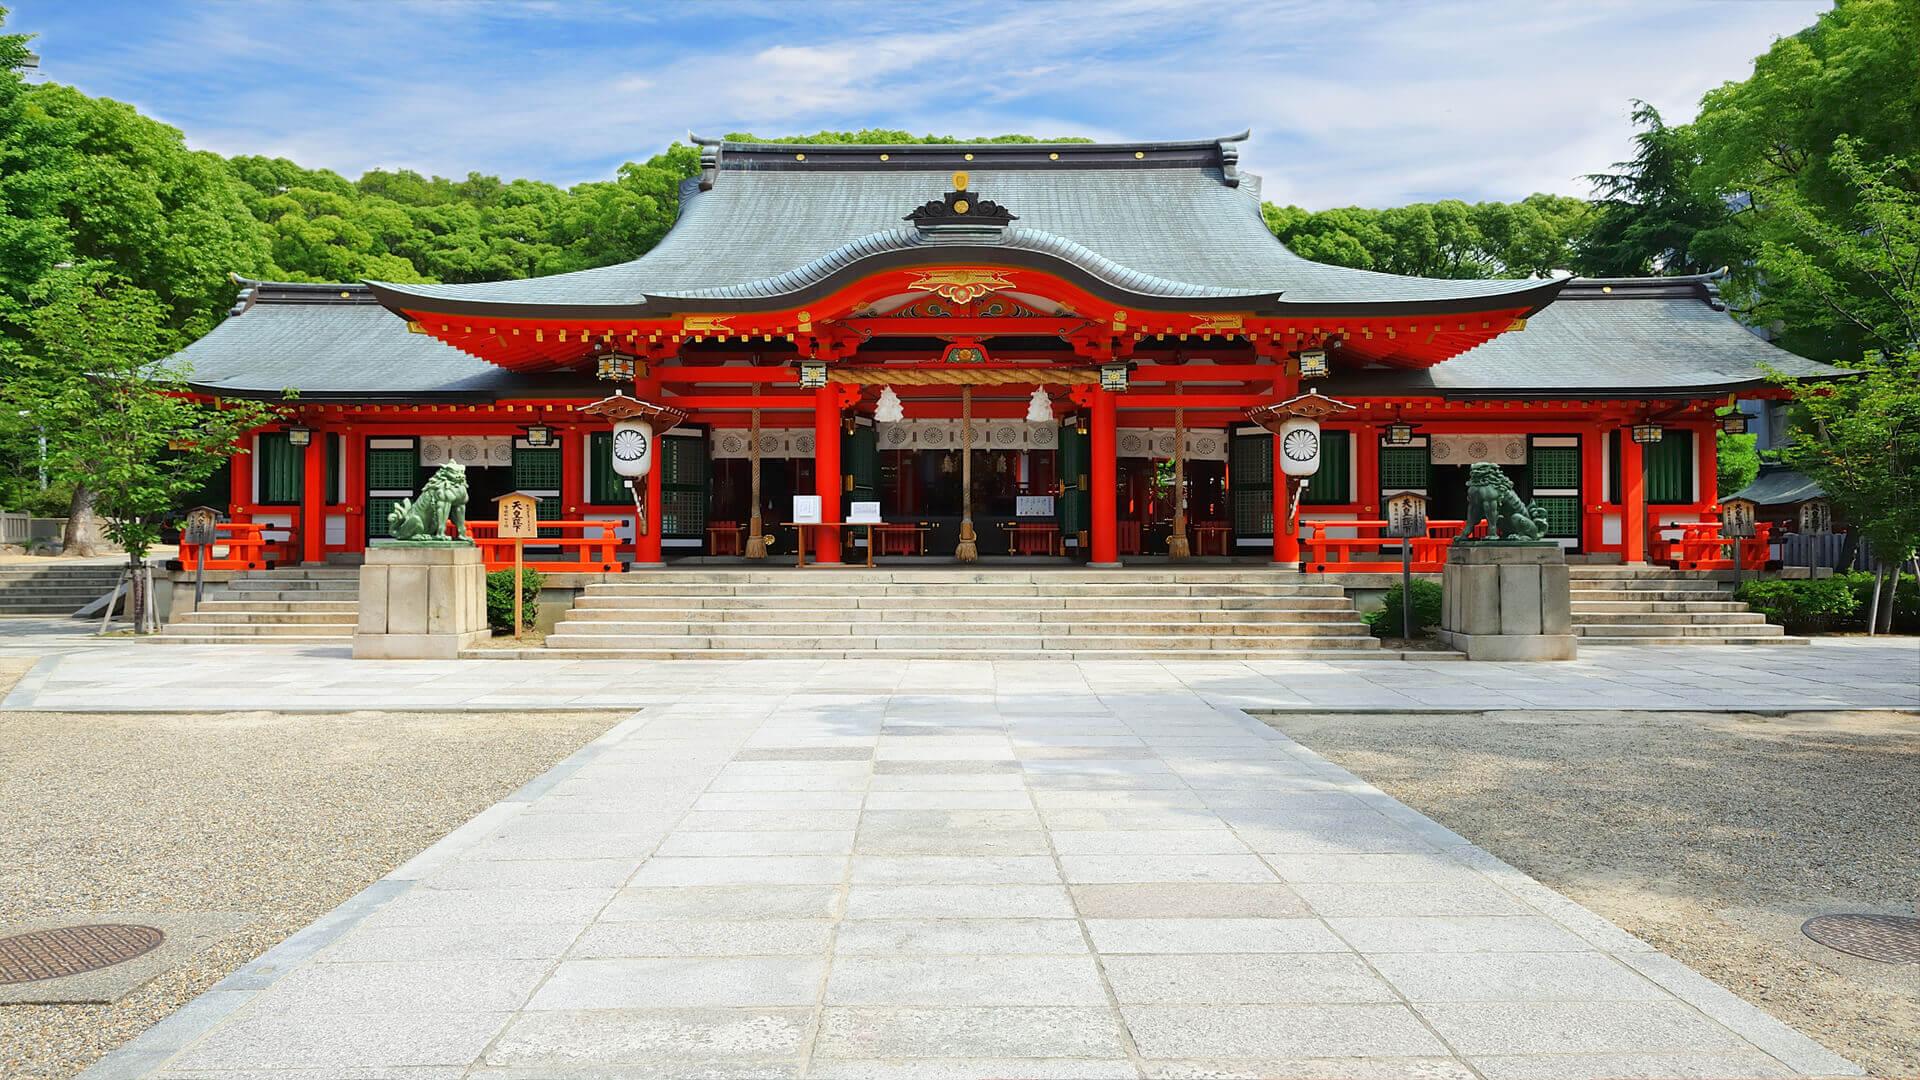 Cover image of this place Ikuta Shrine (生田神社)